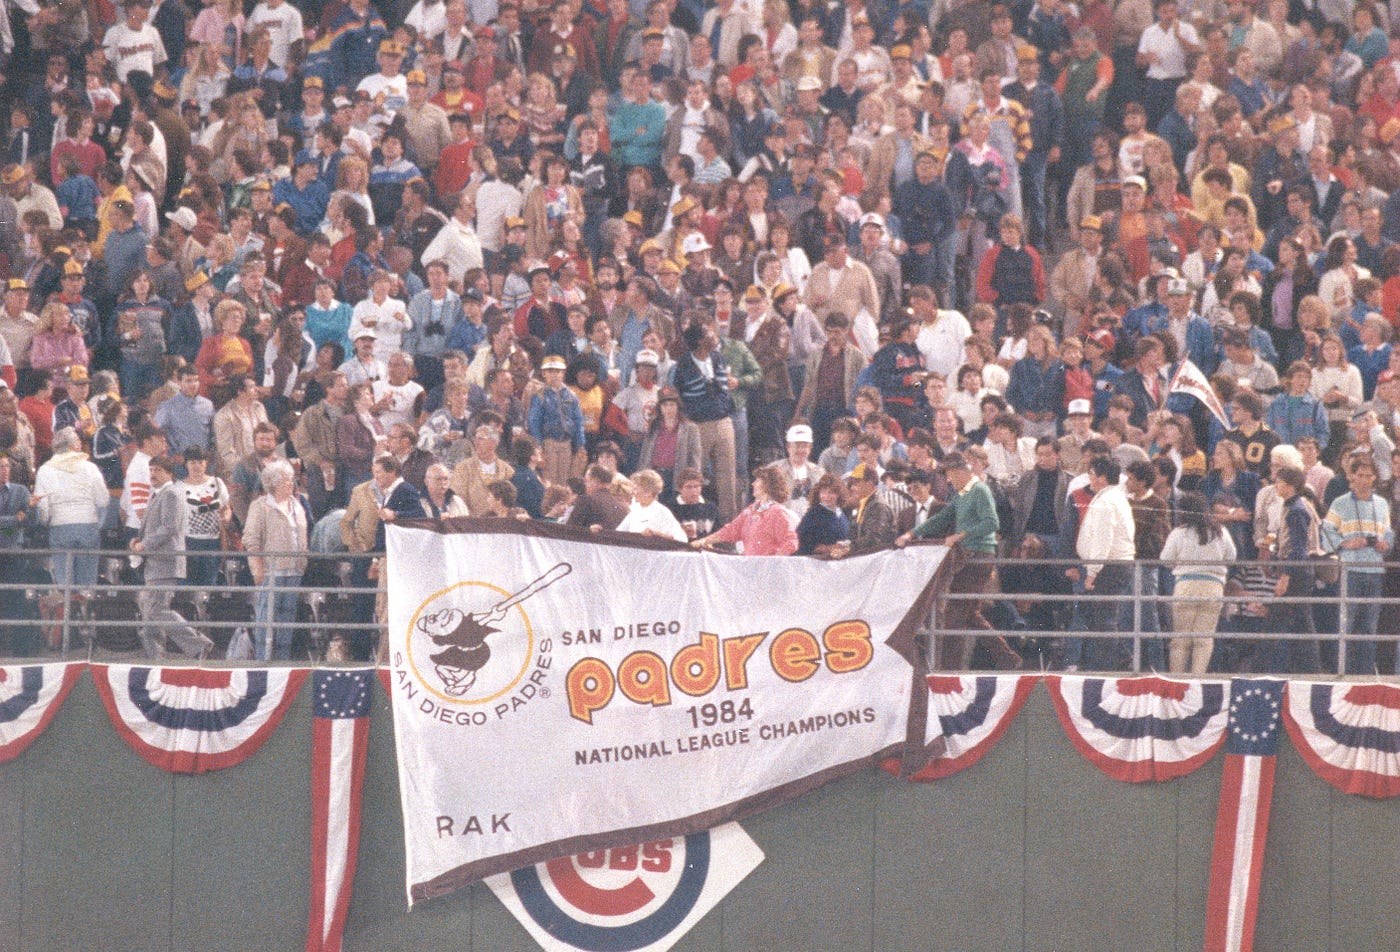 Defeating Cubs to win 1984 National League title №8 on my list of Padres  Greatest Games, by FriarWire